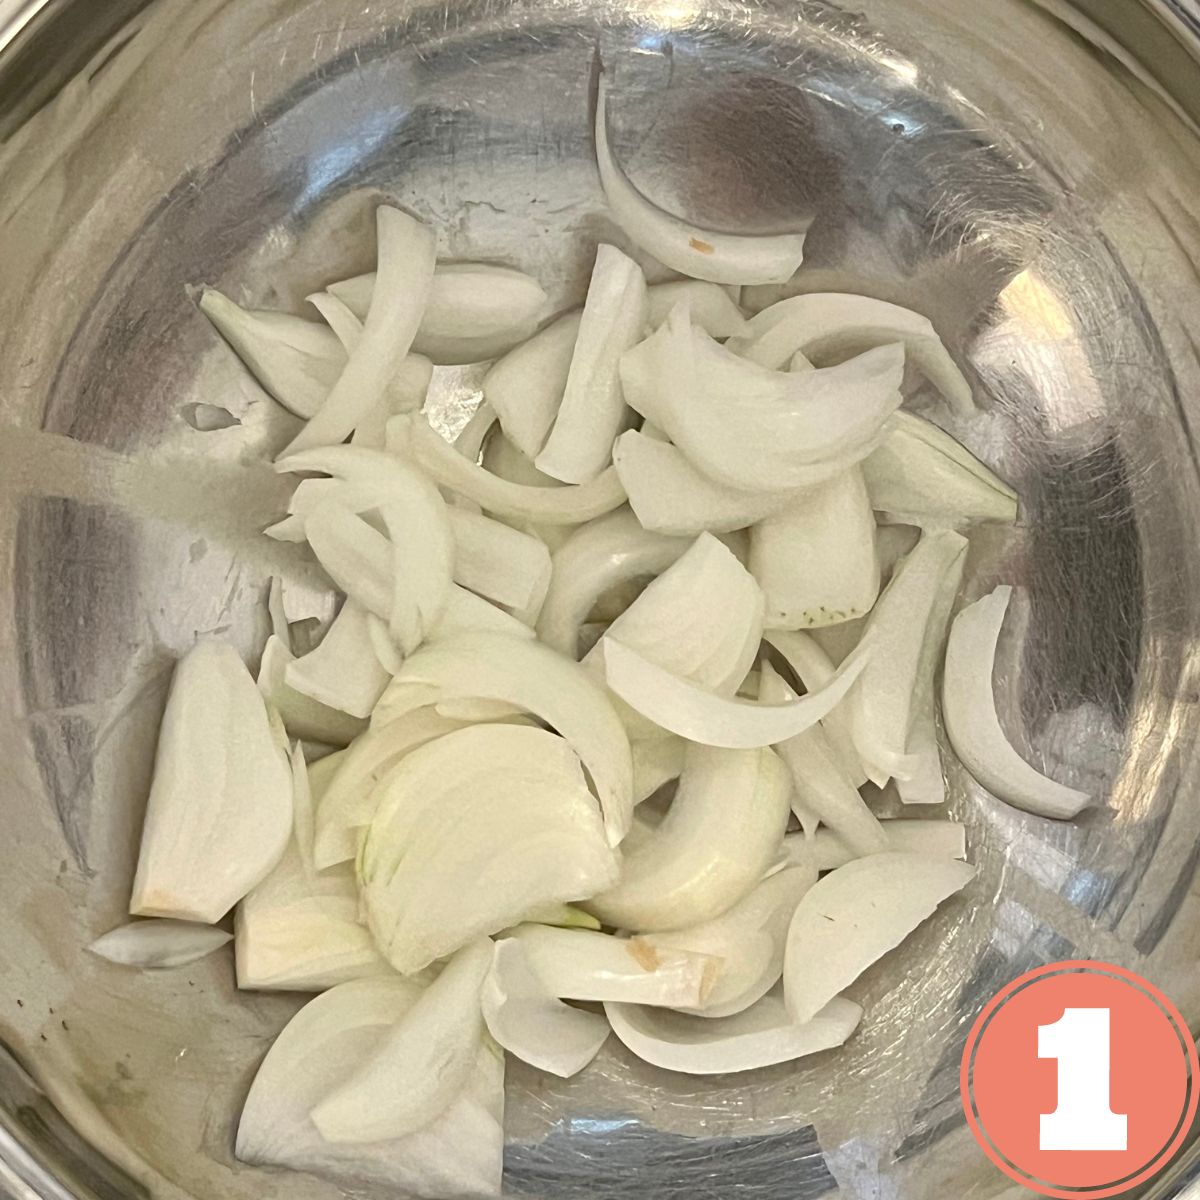 Sliced onions in a stainless steel bowl